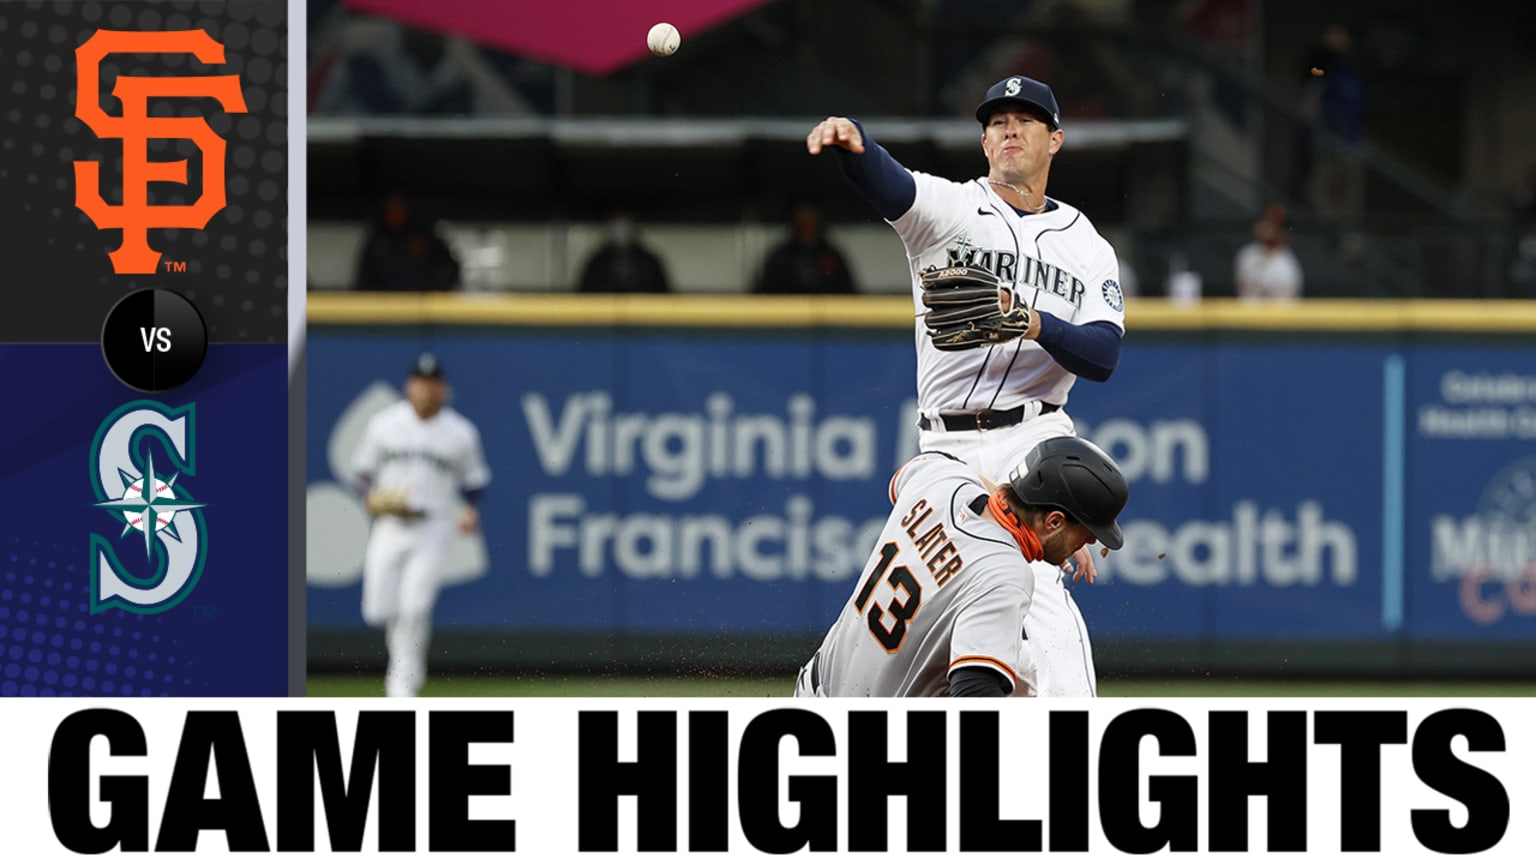 Giants vs. Mariners Highlights 04/01/2021 Seattle Mariners